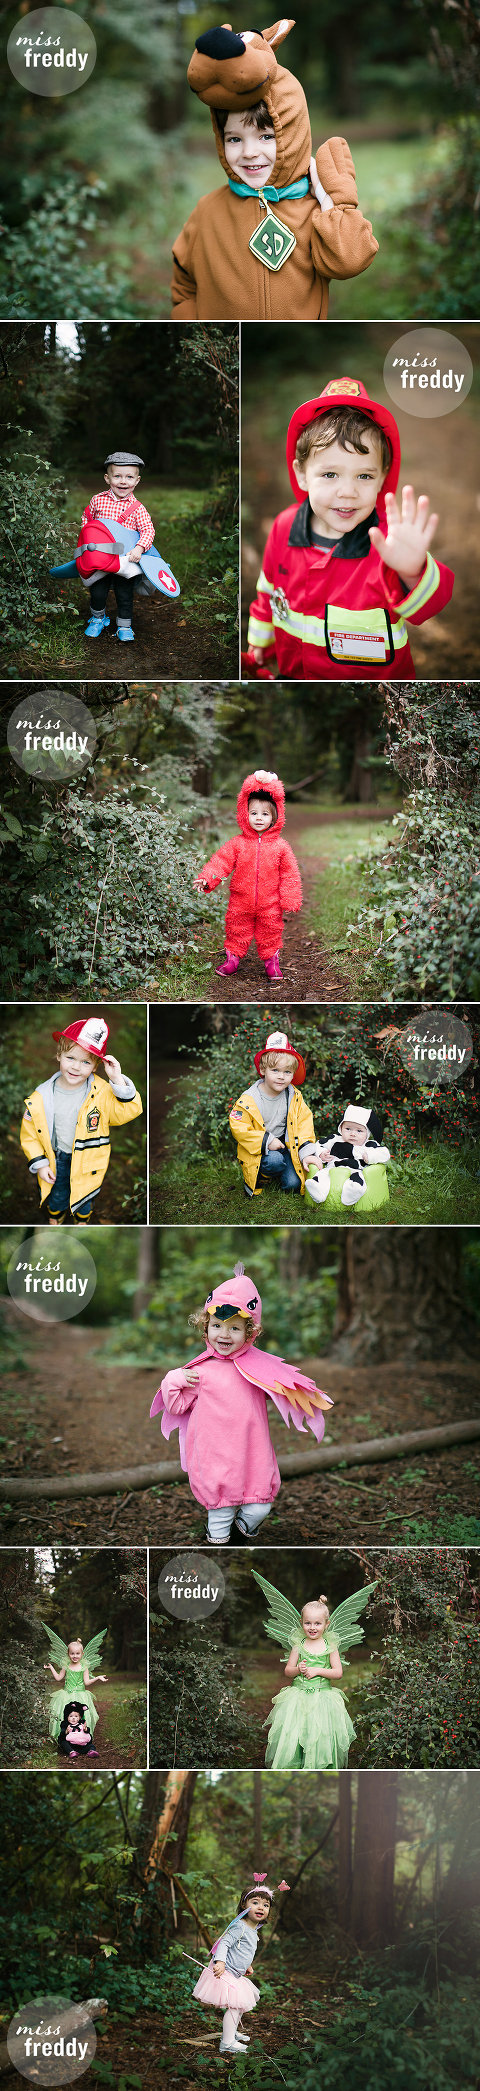 Love these photos of kids in Halloween costumes by Miss Freddy, a kids photographer in Seattle.